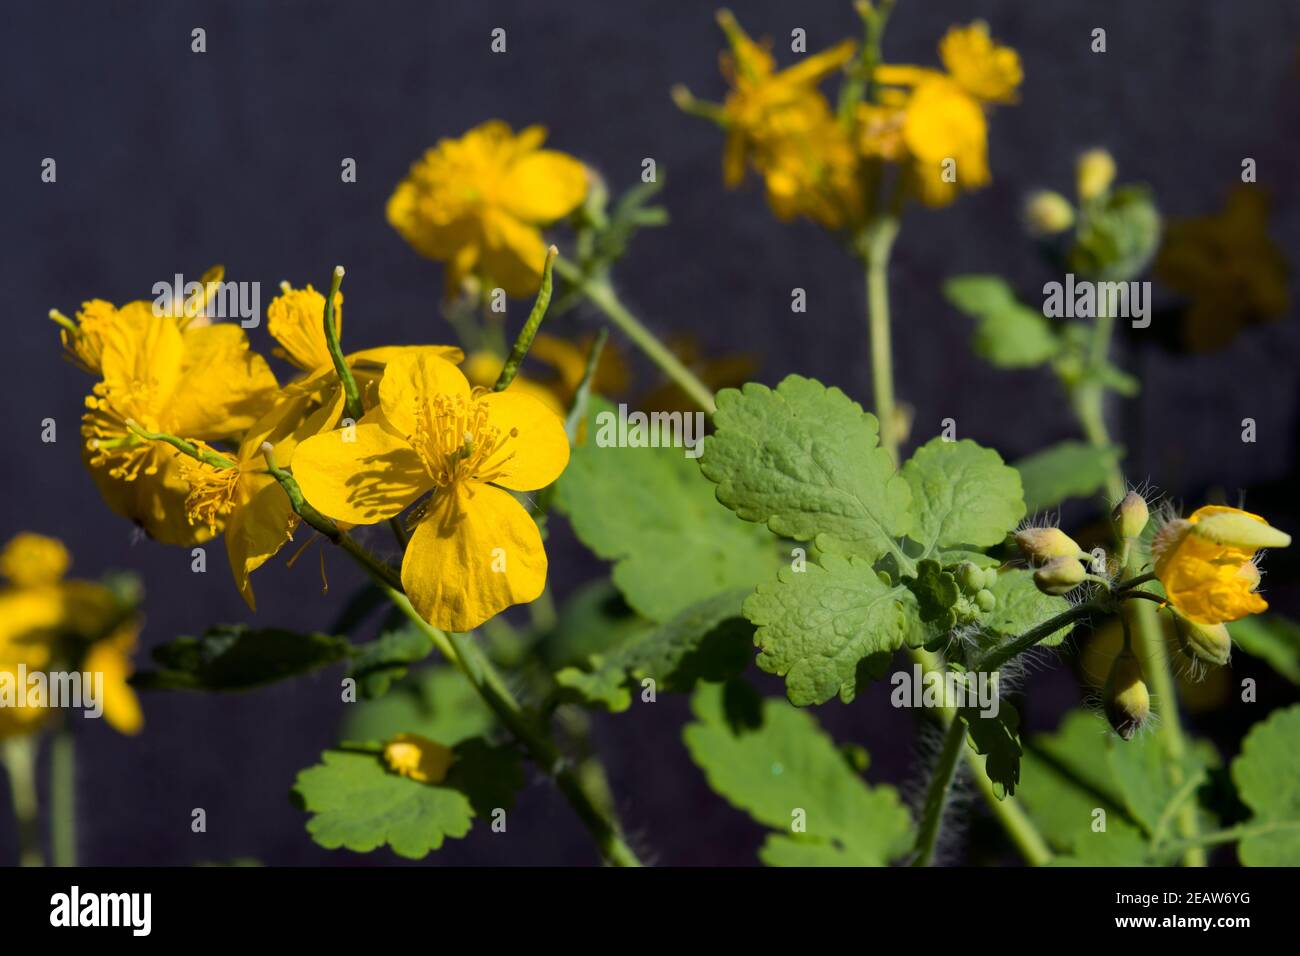 Celandine plant of the buttercup family that produces yellow flowers in the early spring. Sunny photo. Stock Photo